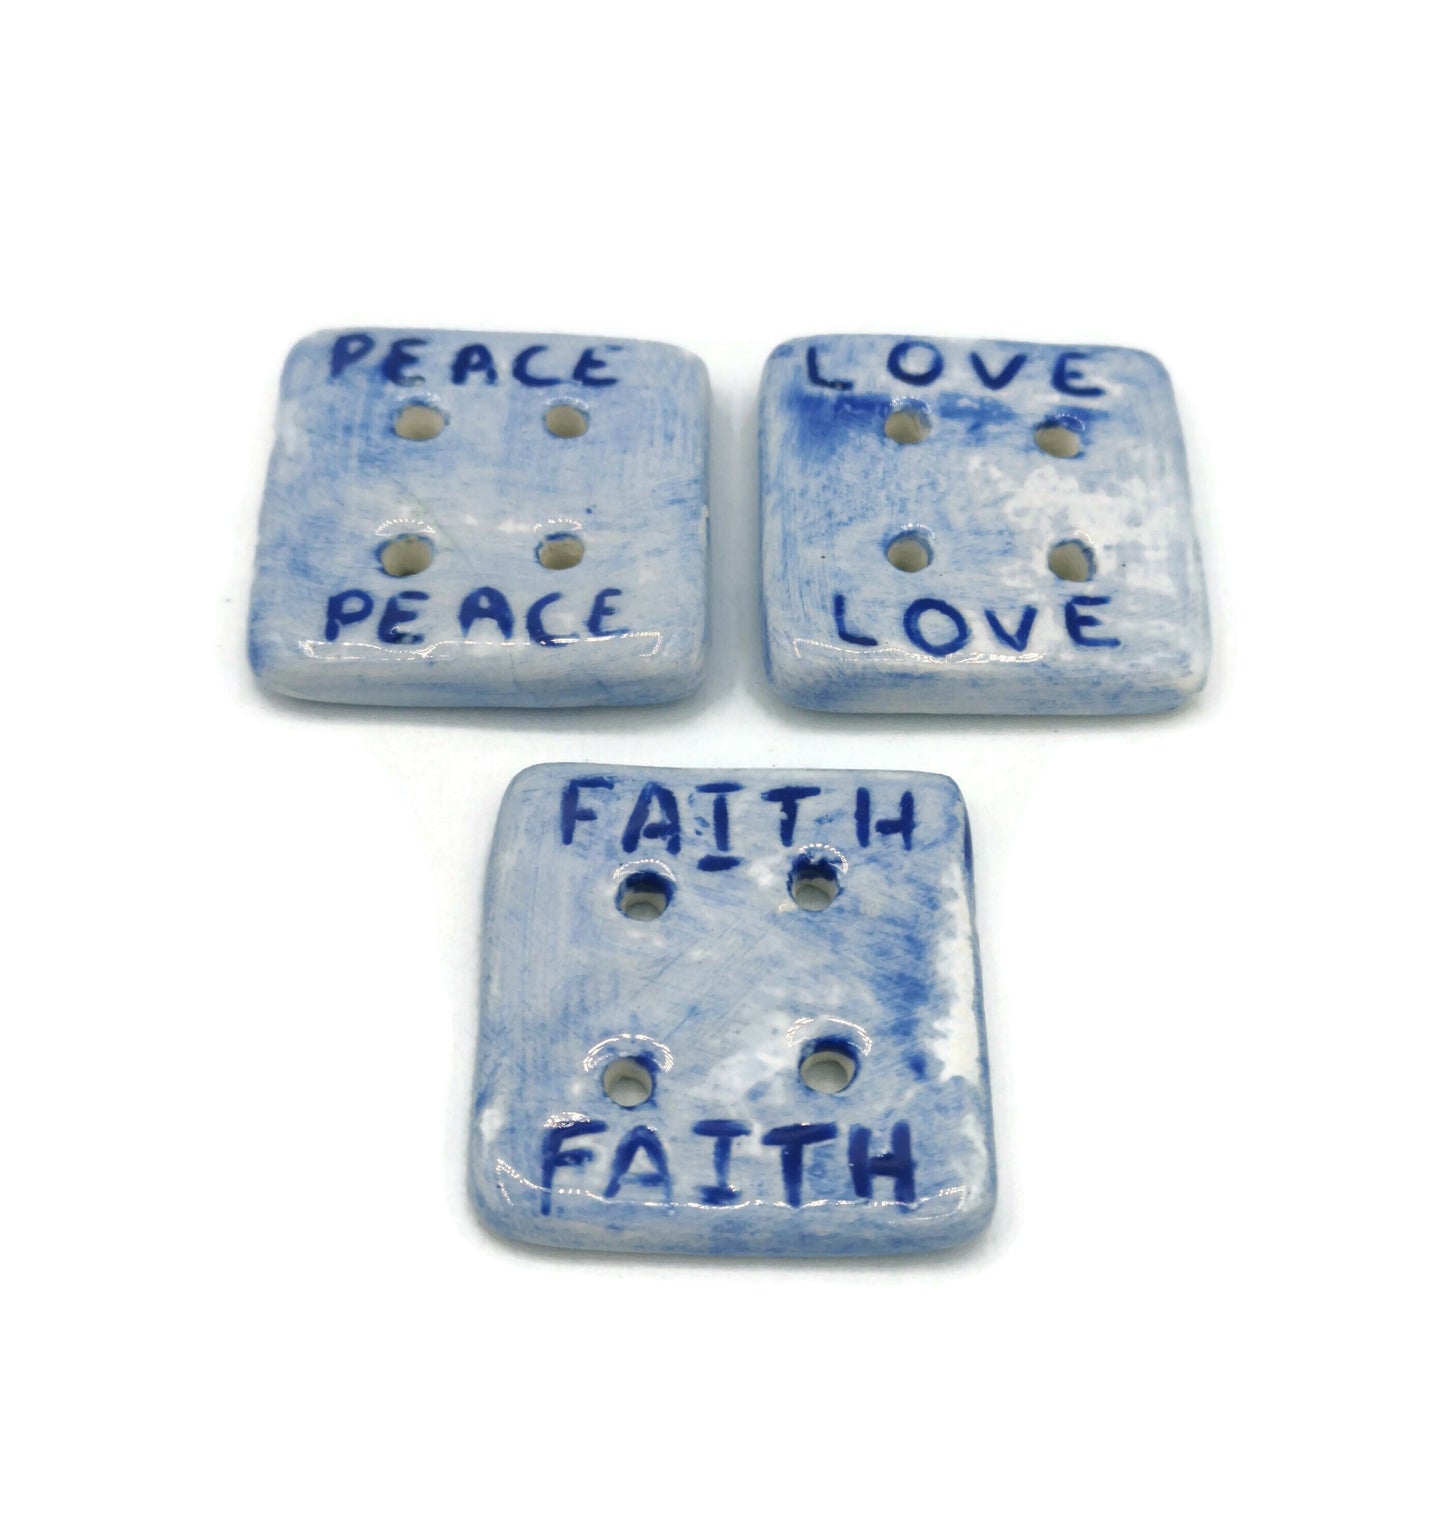 3Pc Extra Large Square Blue Ceramic Sewing Buttons Lot, Novelty Decorative Positive Words Sewing Supplies And Notions, Cute Gifts For Her - Ceramica Ana Rafael